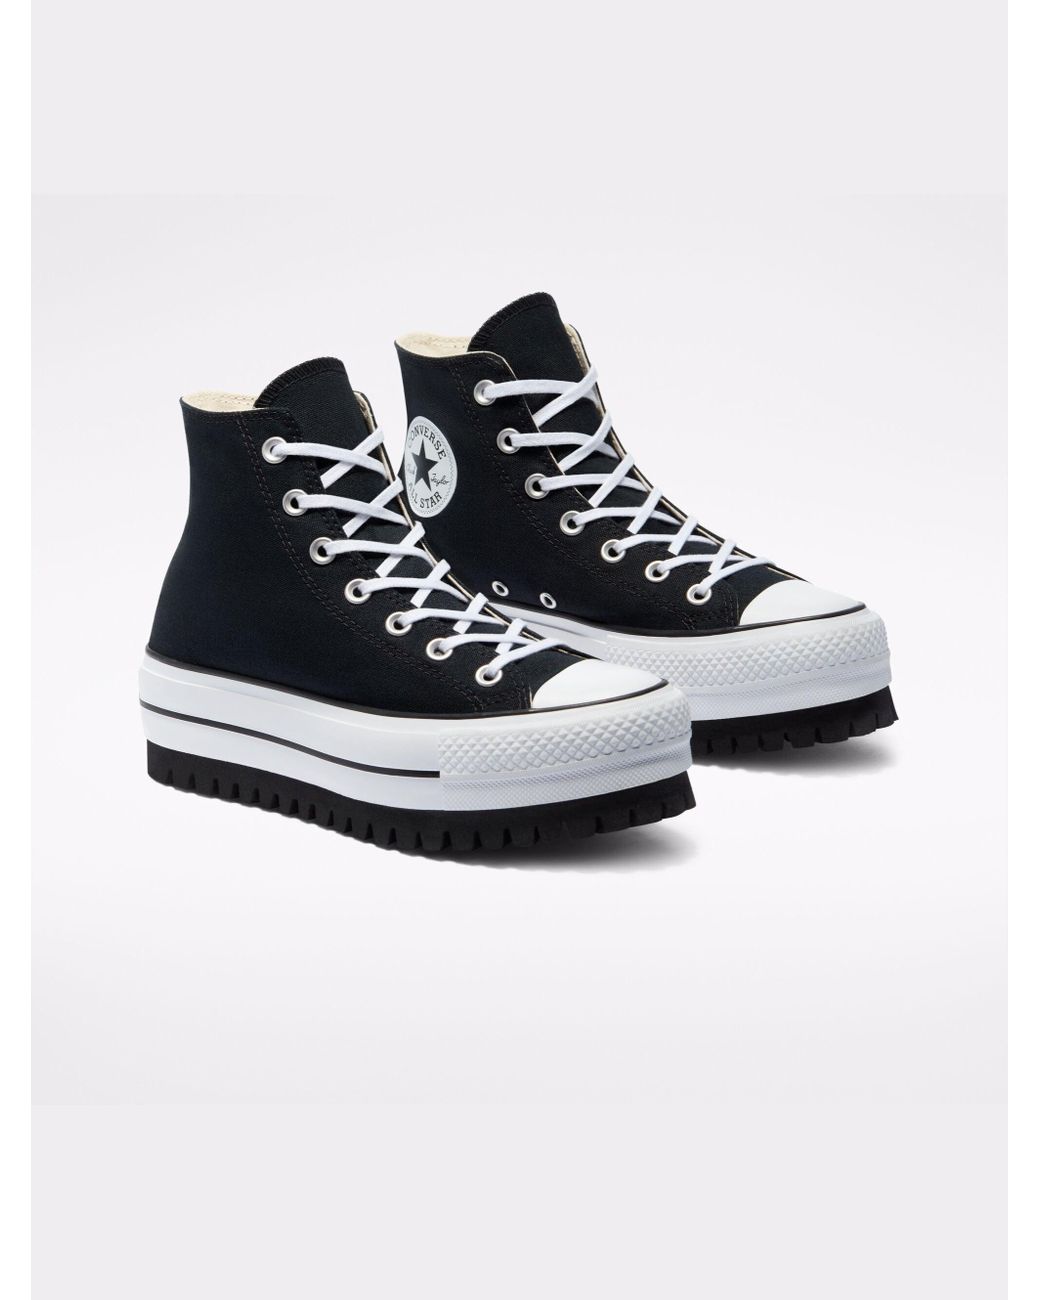 Converse Canvas Sneakers With Black Grooved Sole | Lyst